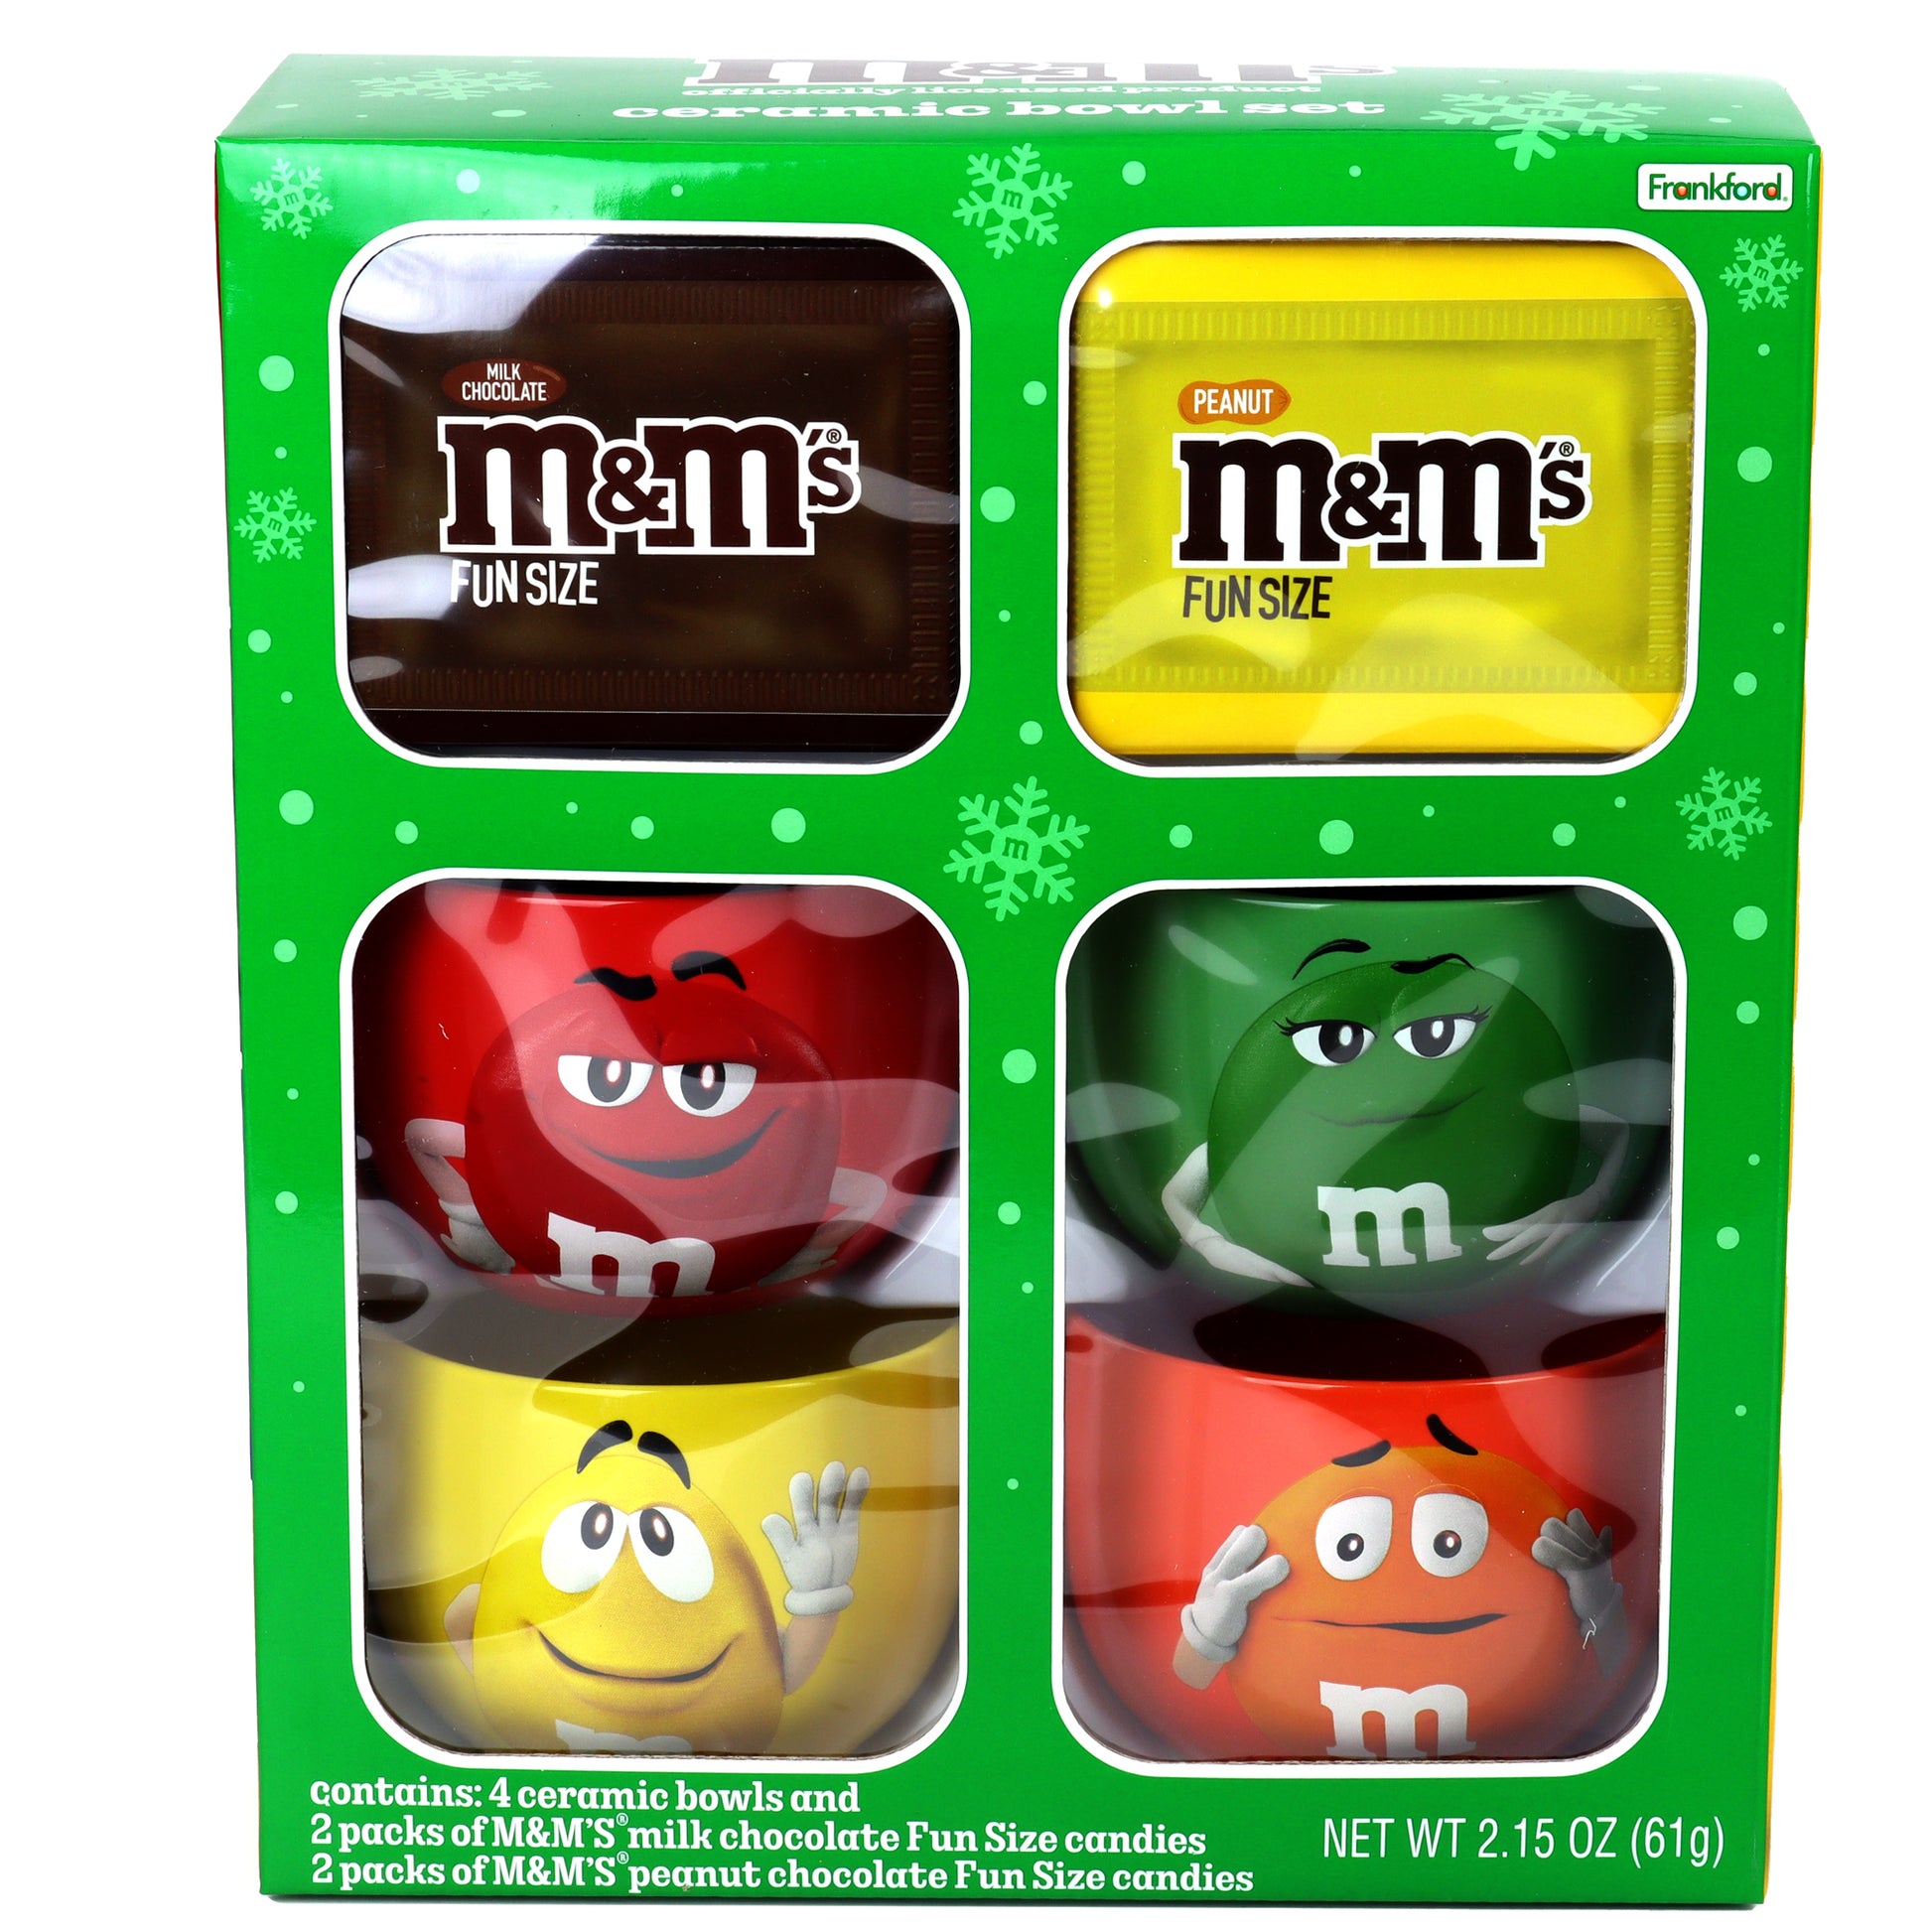 M&M's Chocolate Red Pack, 250g